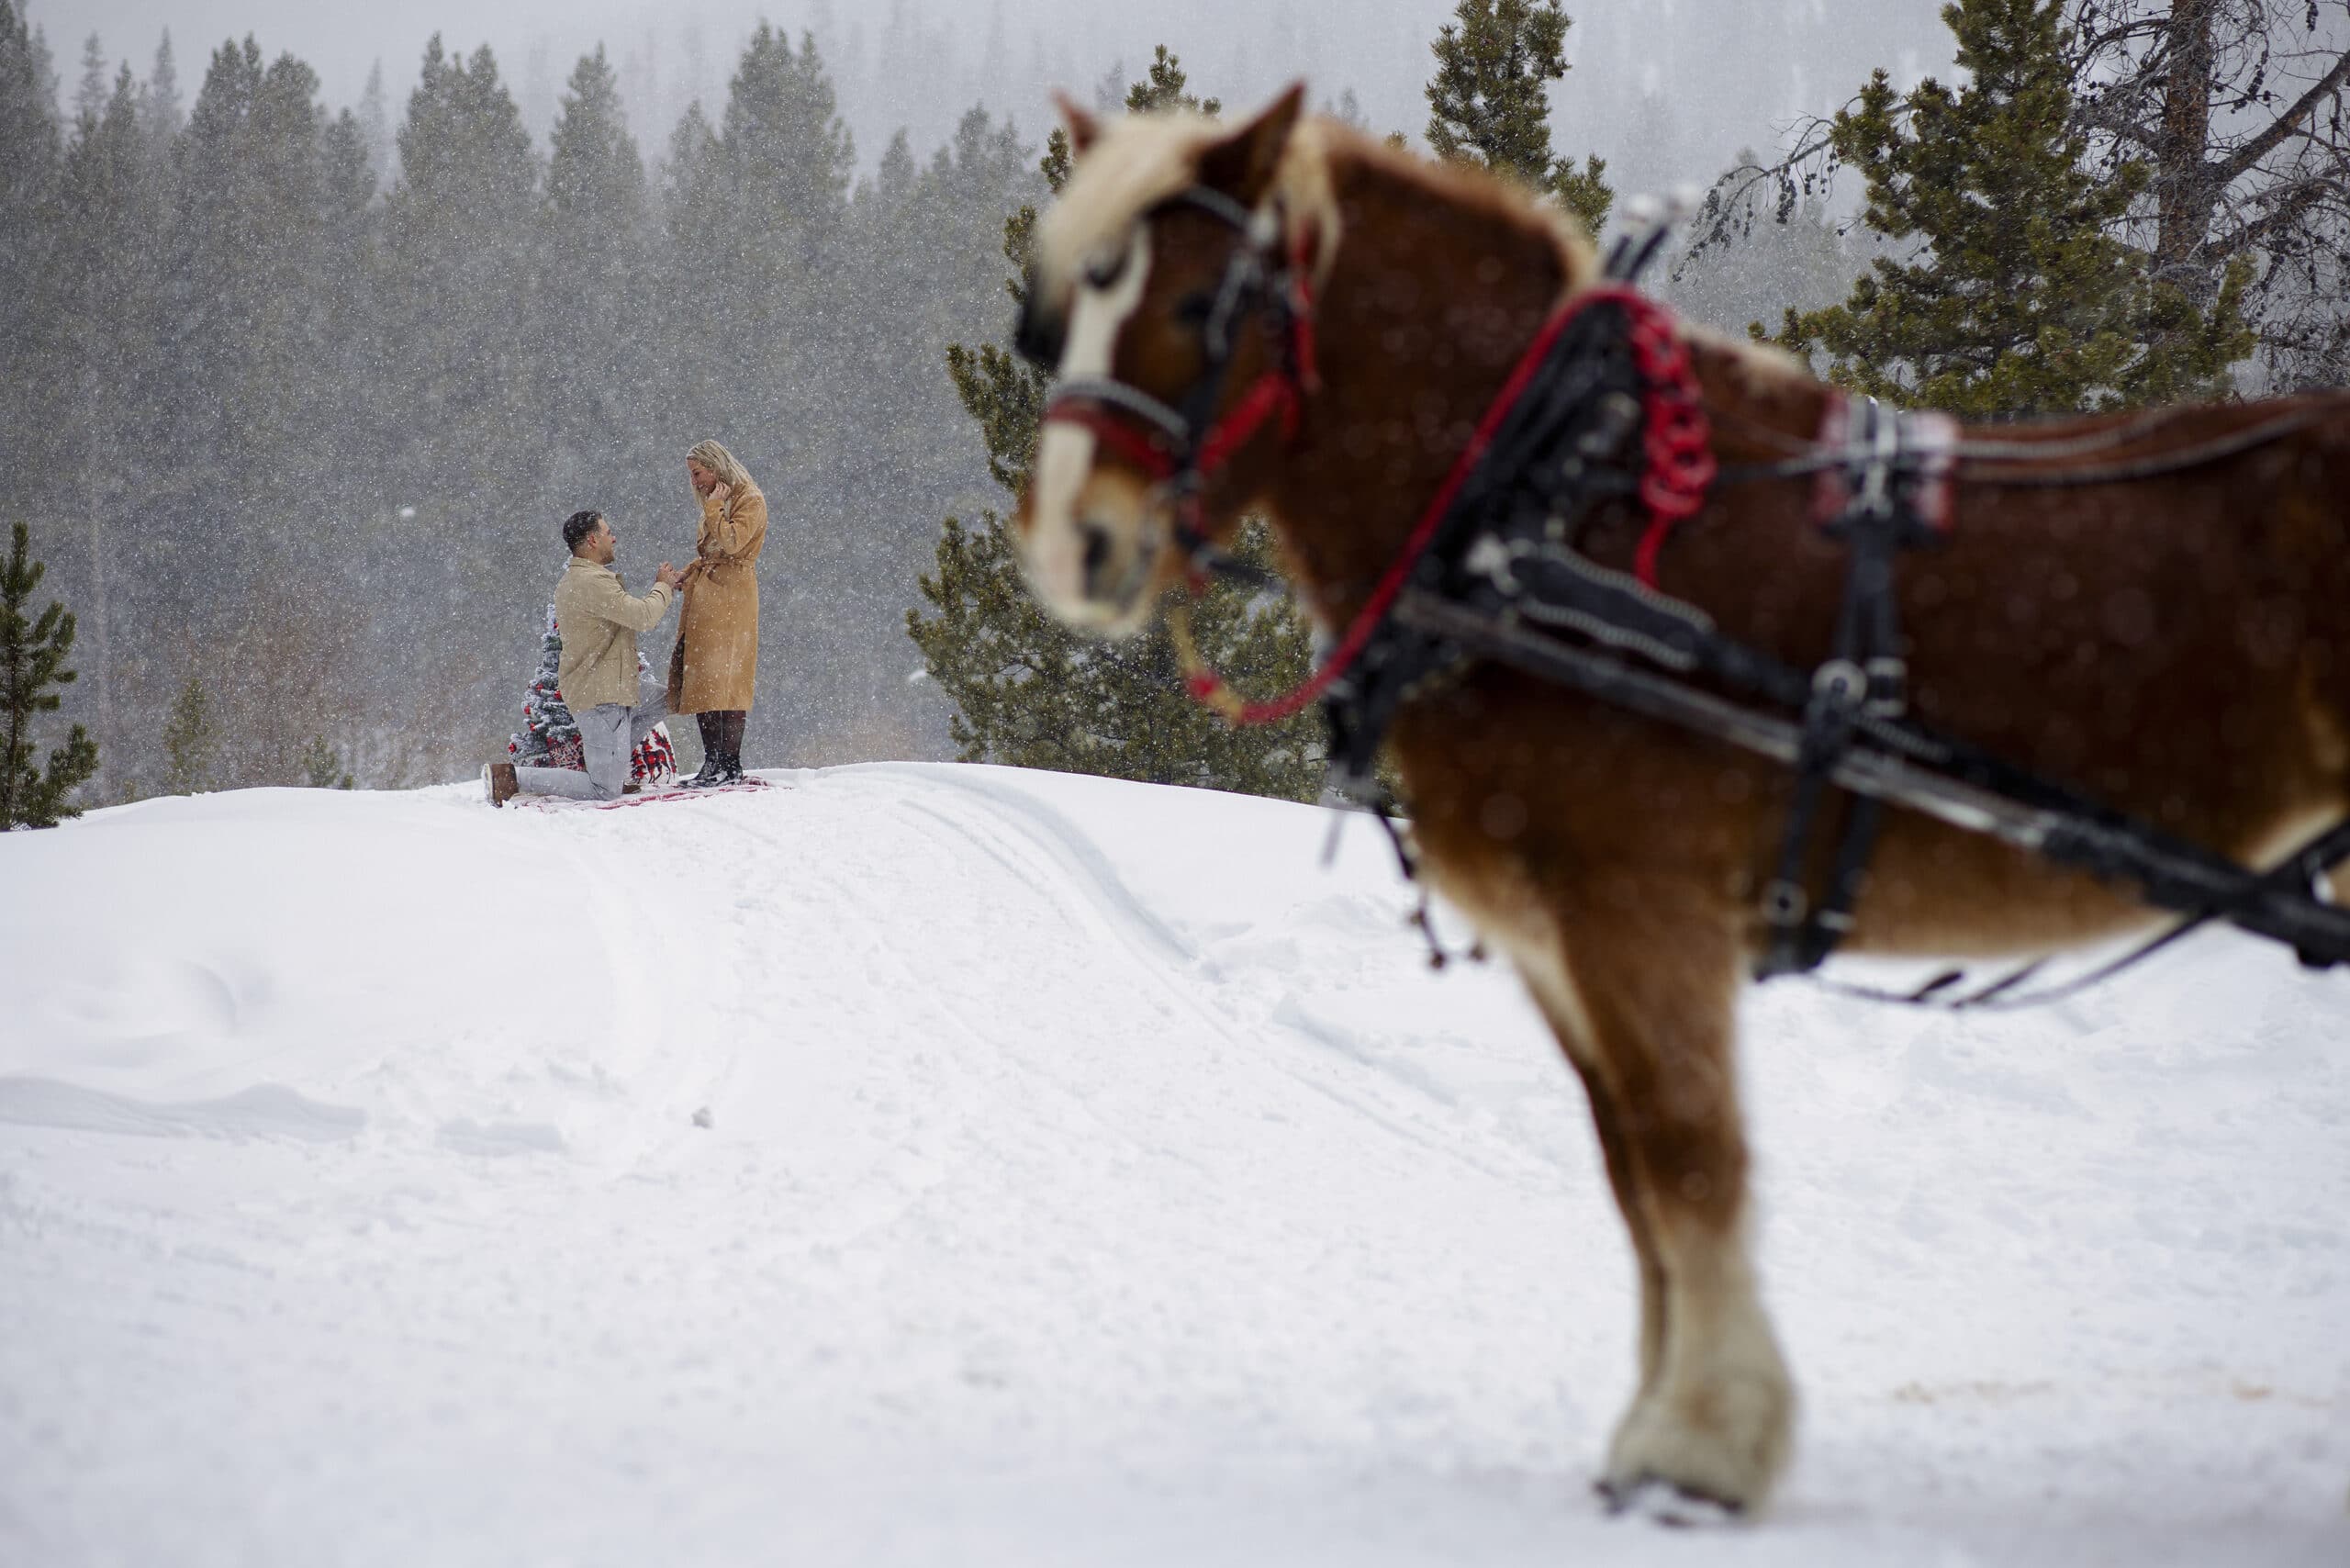 Jake proposes to Avery as a Clydesdale horse stands nearby while it snows in Breckenridge, Colorado